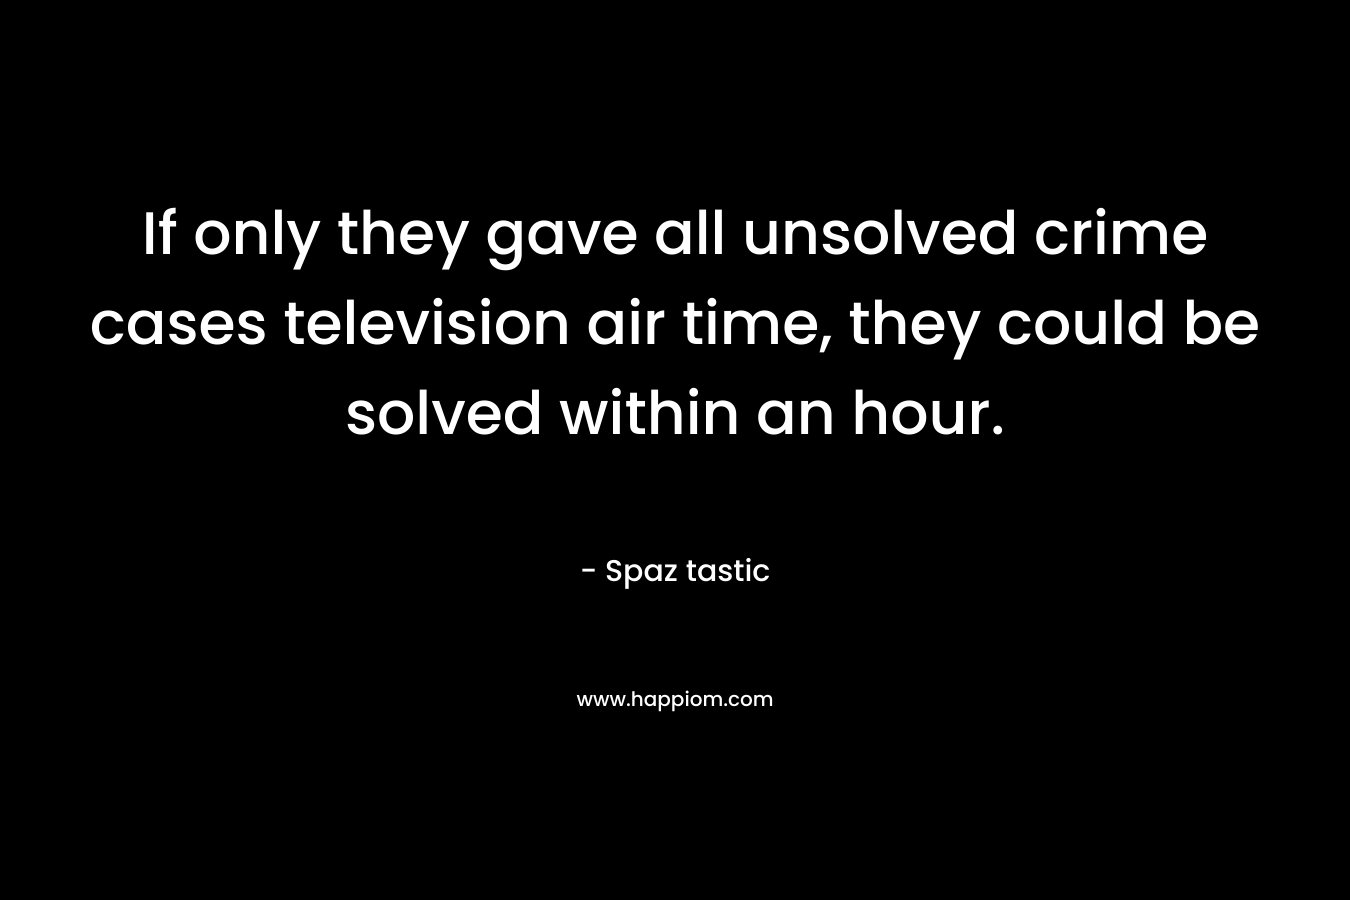 If only they gave all unsolved crime cases television air time, they could be solved within an hour. – Spaz tastic